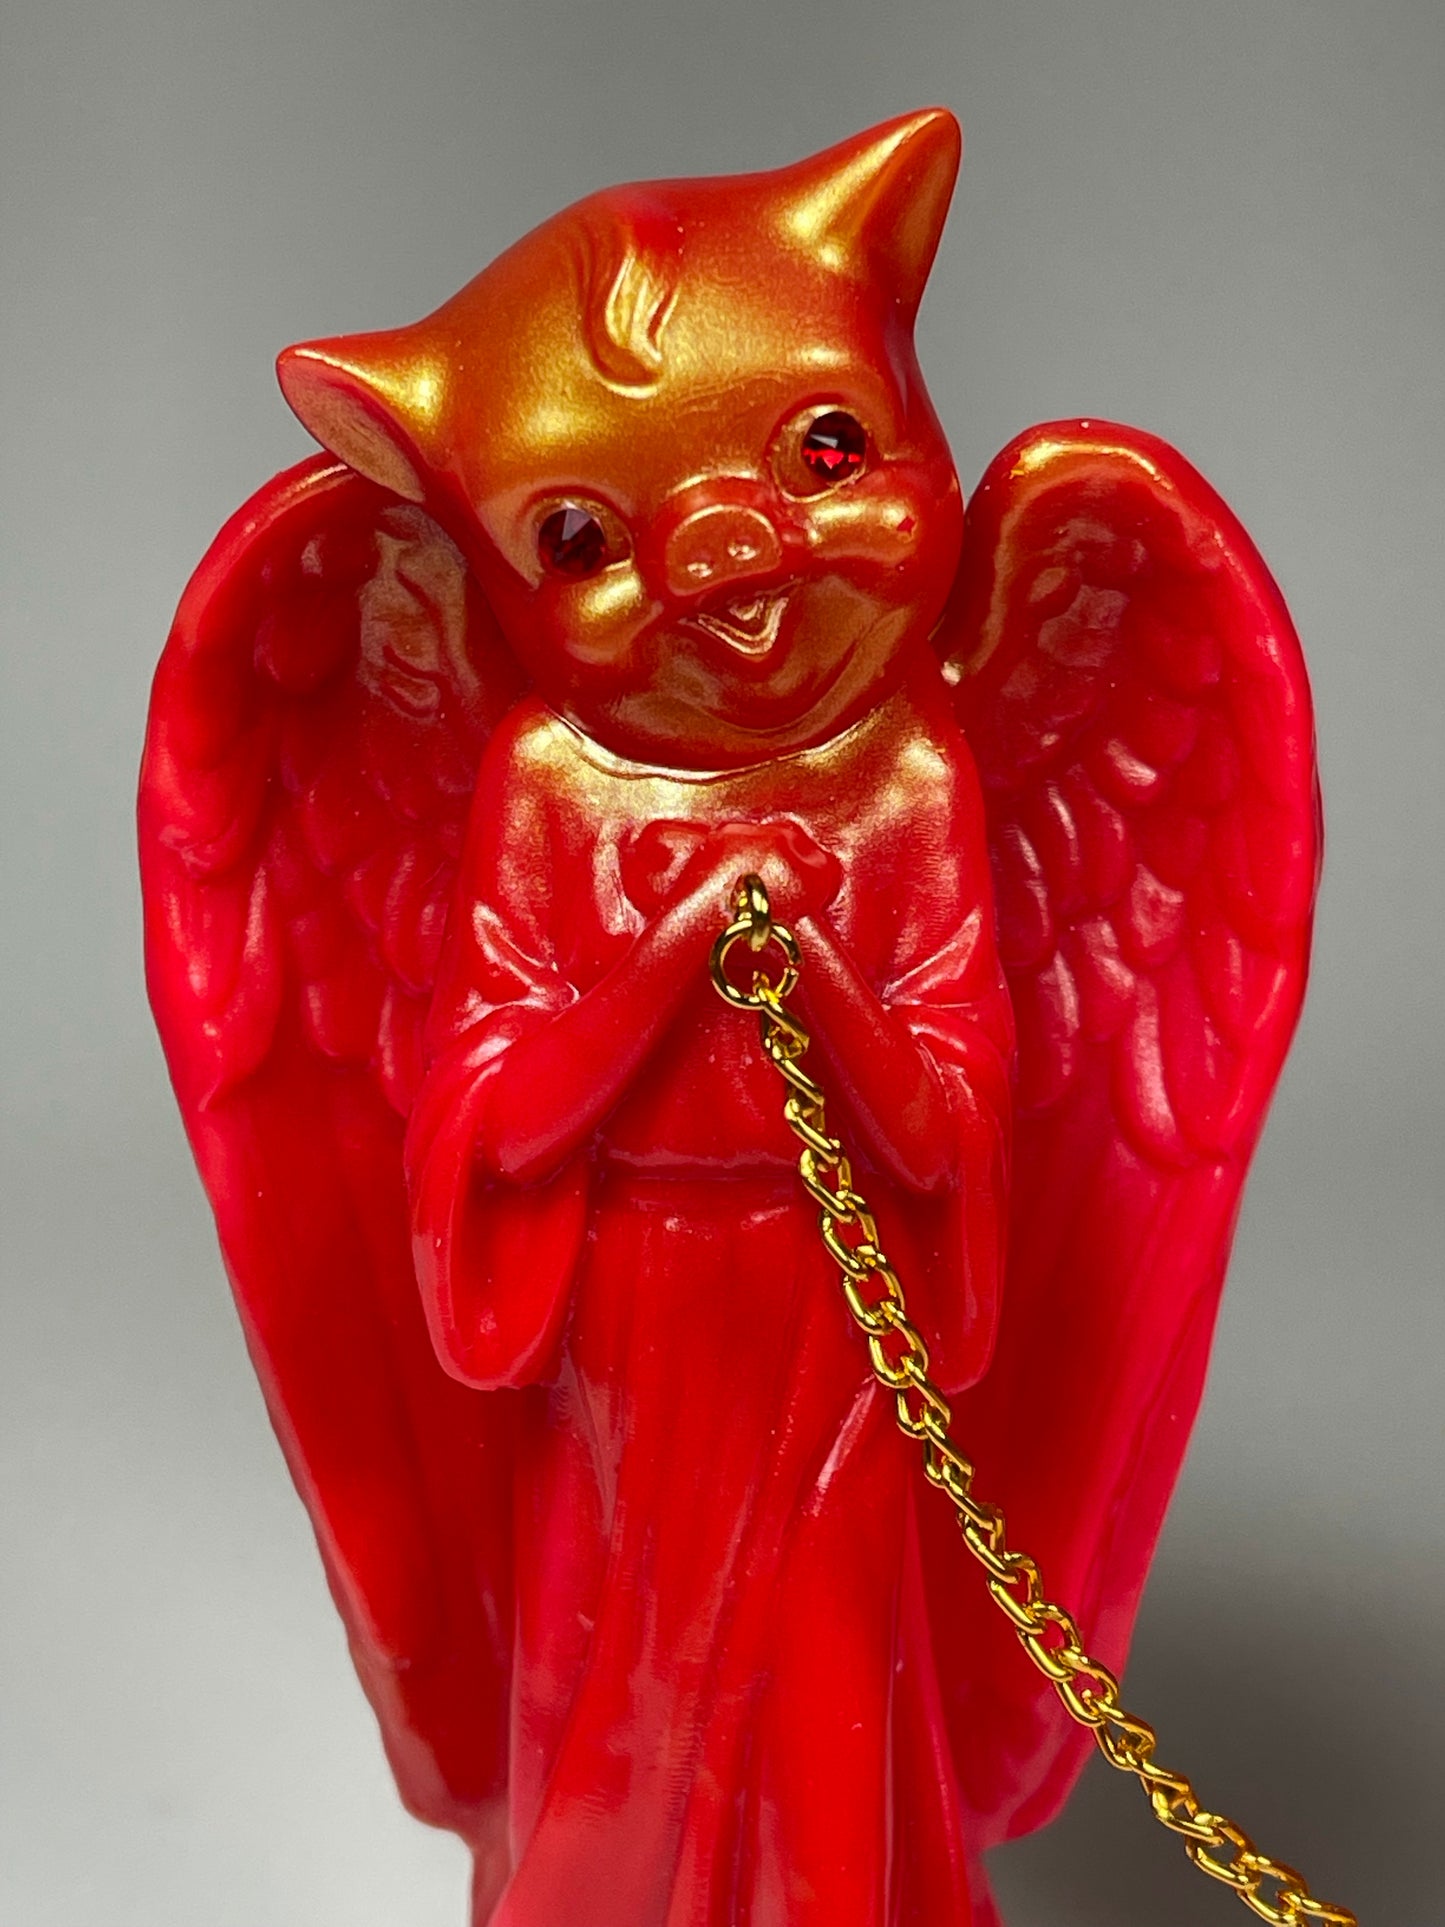 Angel Pig: Tickled by Hell Flame